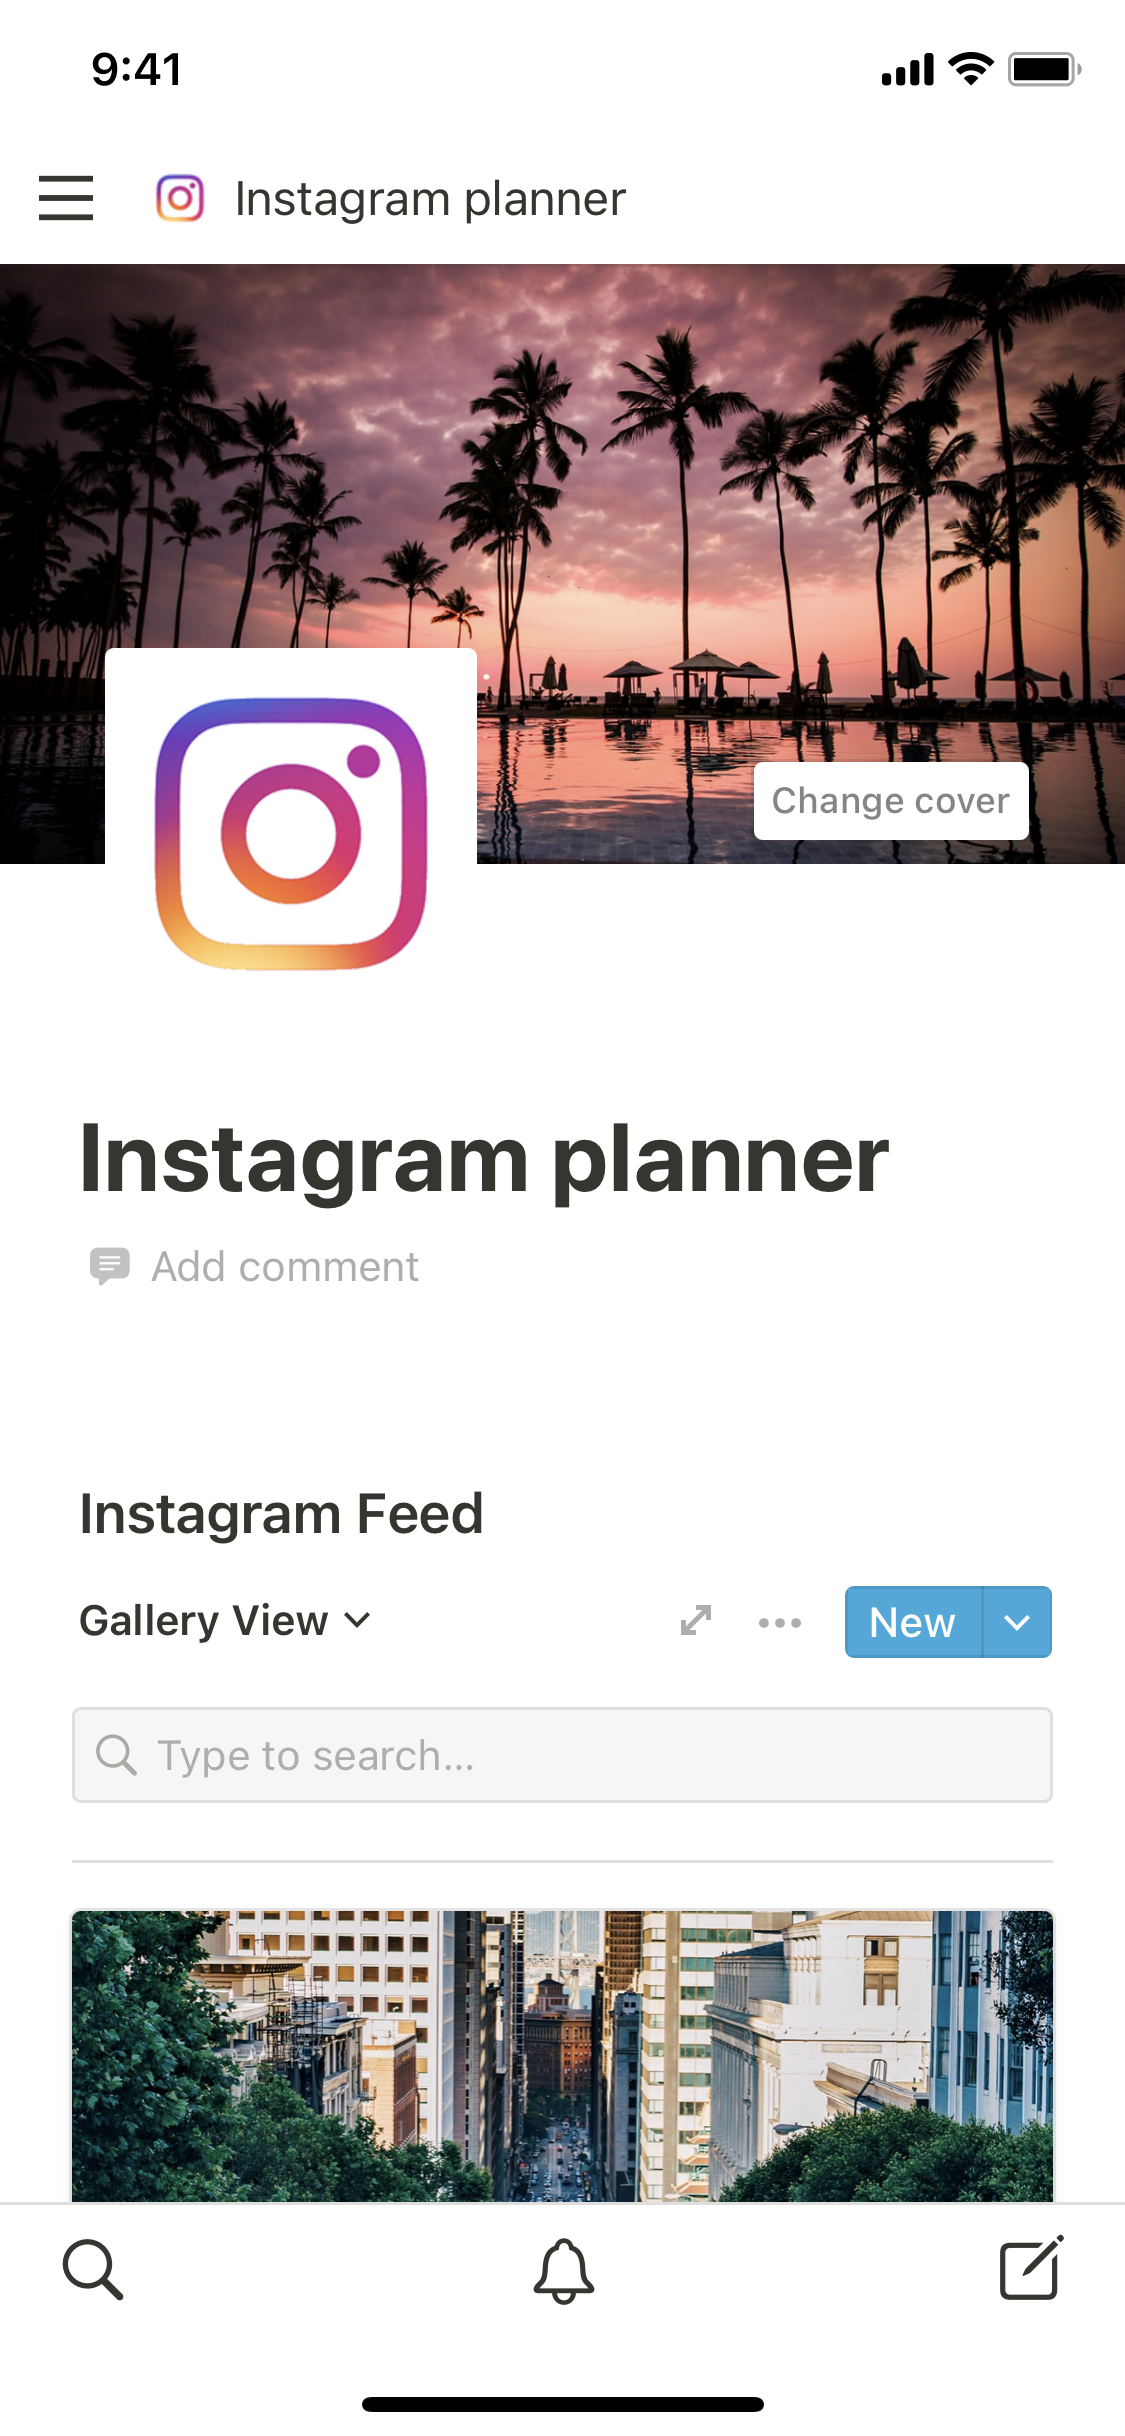 The mobile image for the Instagram planner template